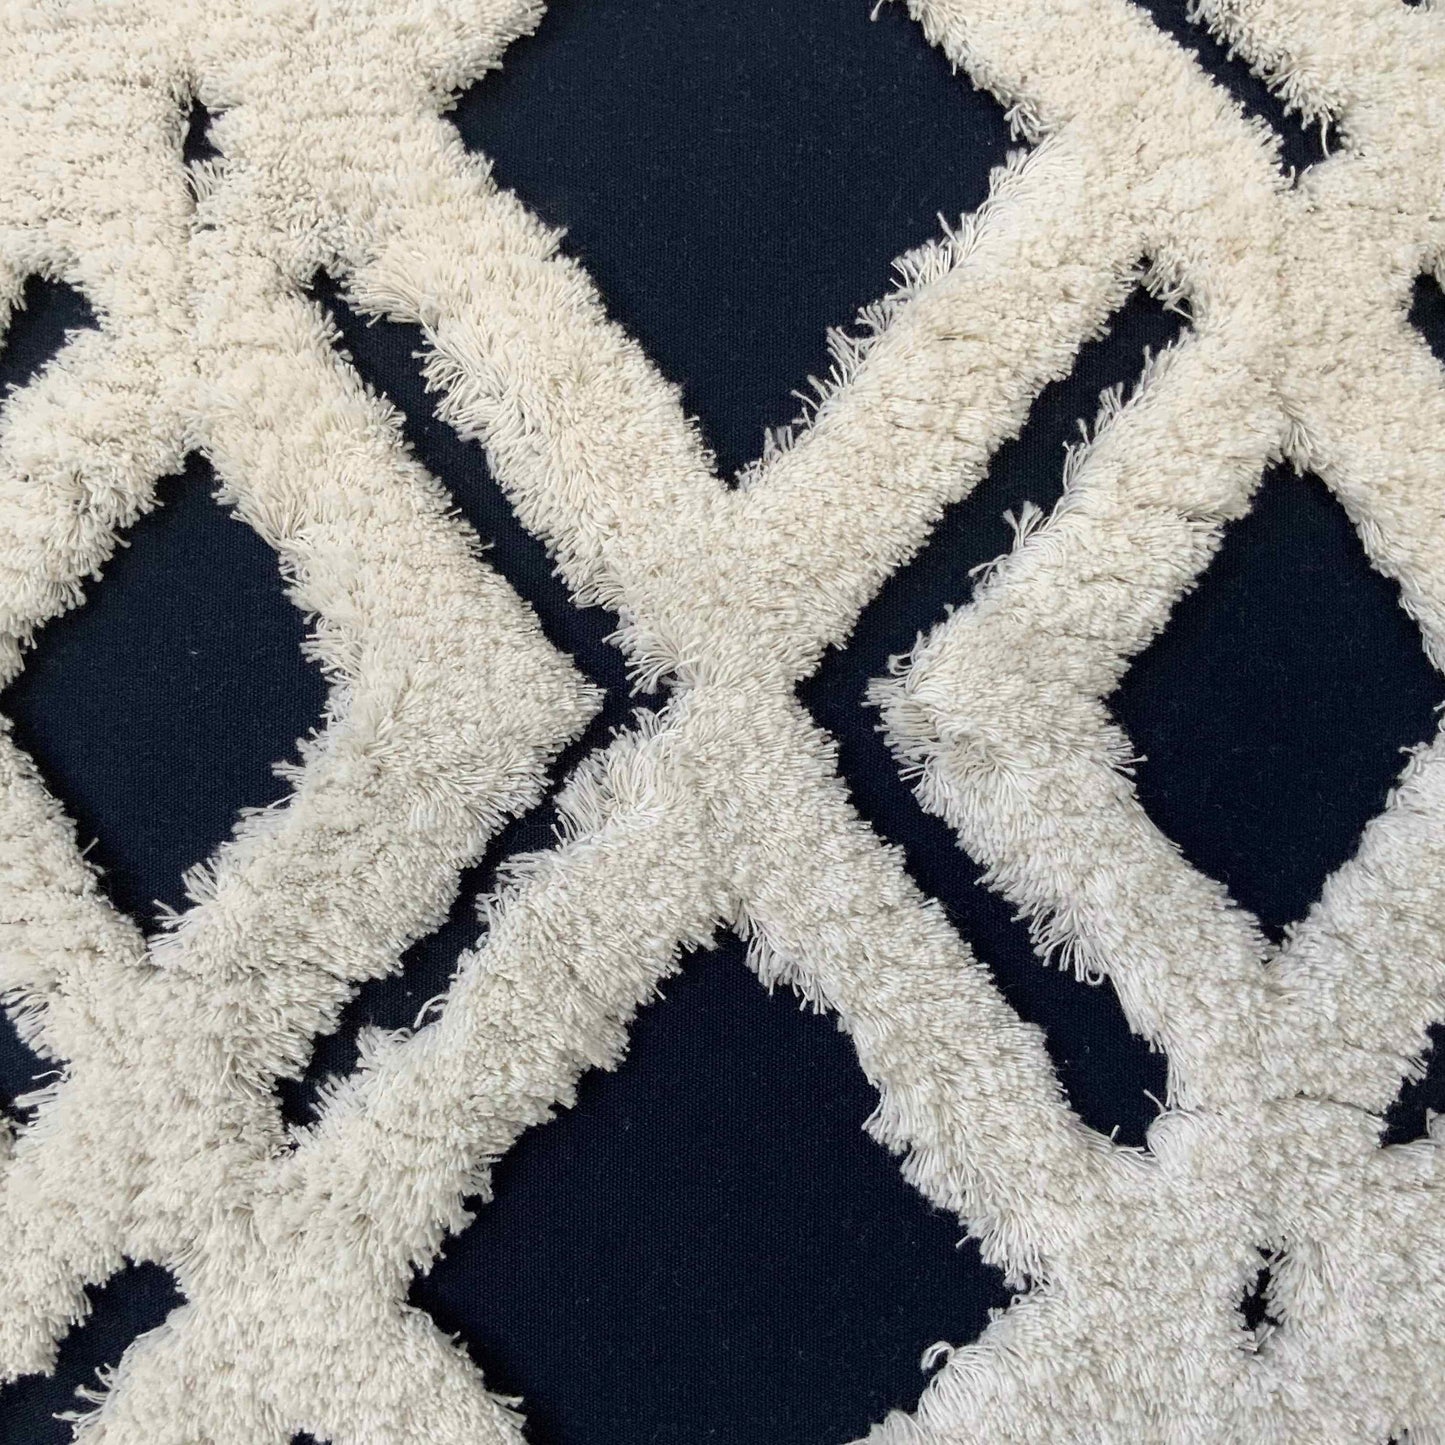 AFGHAN CUSHION | NAVY AND WHITE TRELLIS | 55CM X 55CM | CHOOSE FEATHER OR FIBRE FILLING